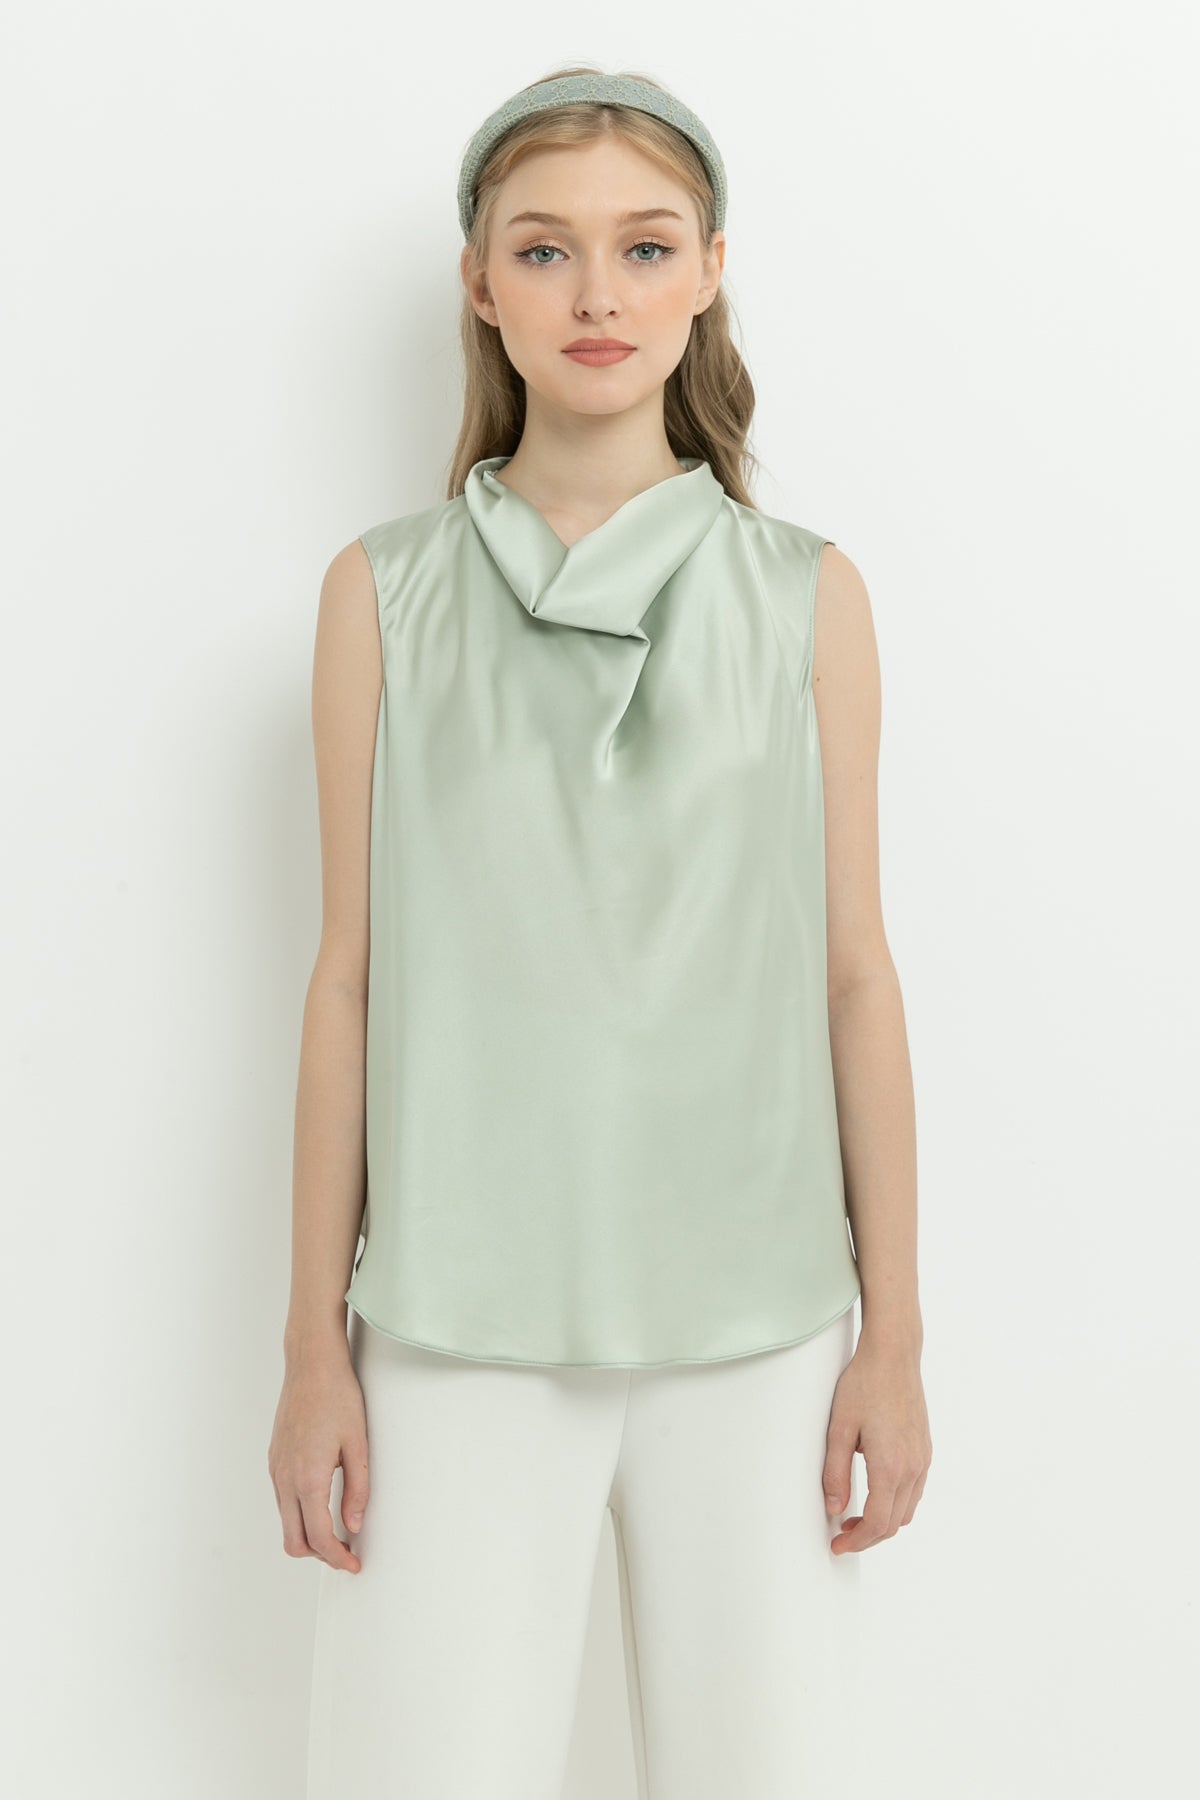 Cher Top in Mint